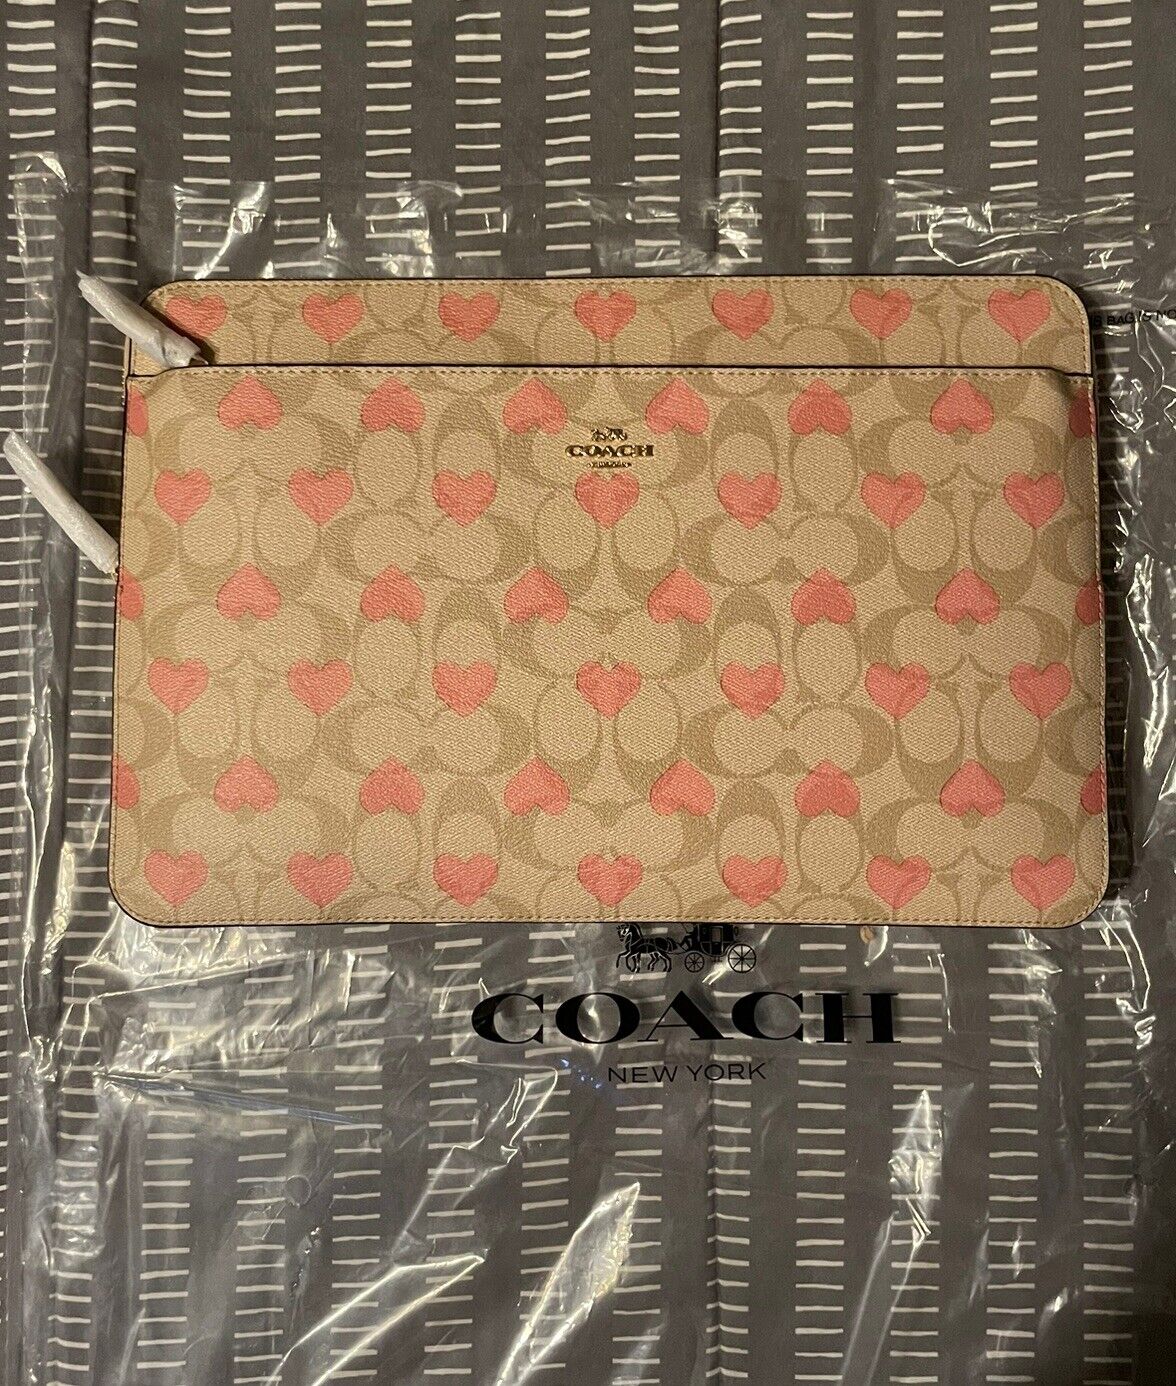 NWT Coach Laptop Sleeve In Signature Canvas With Heart Print 13”